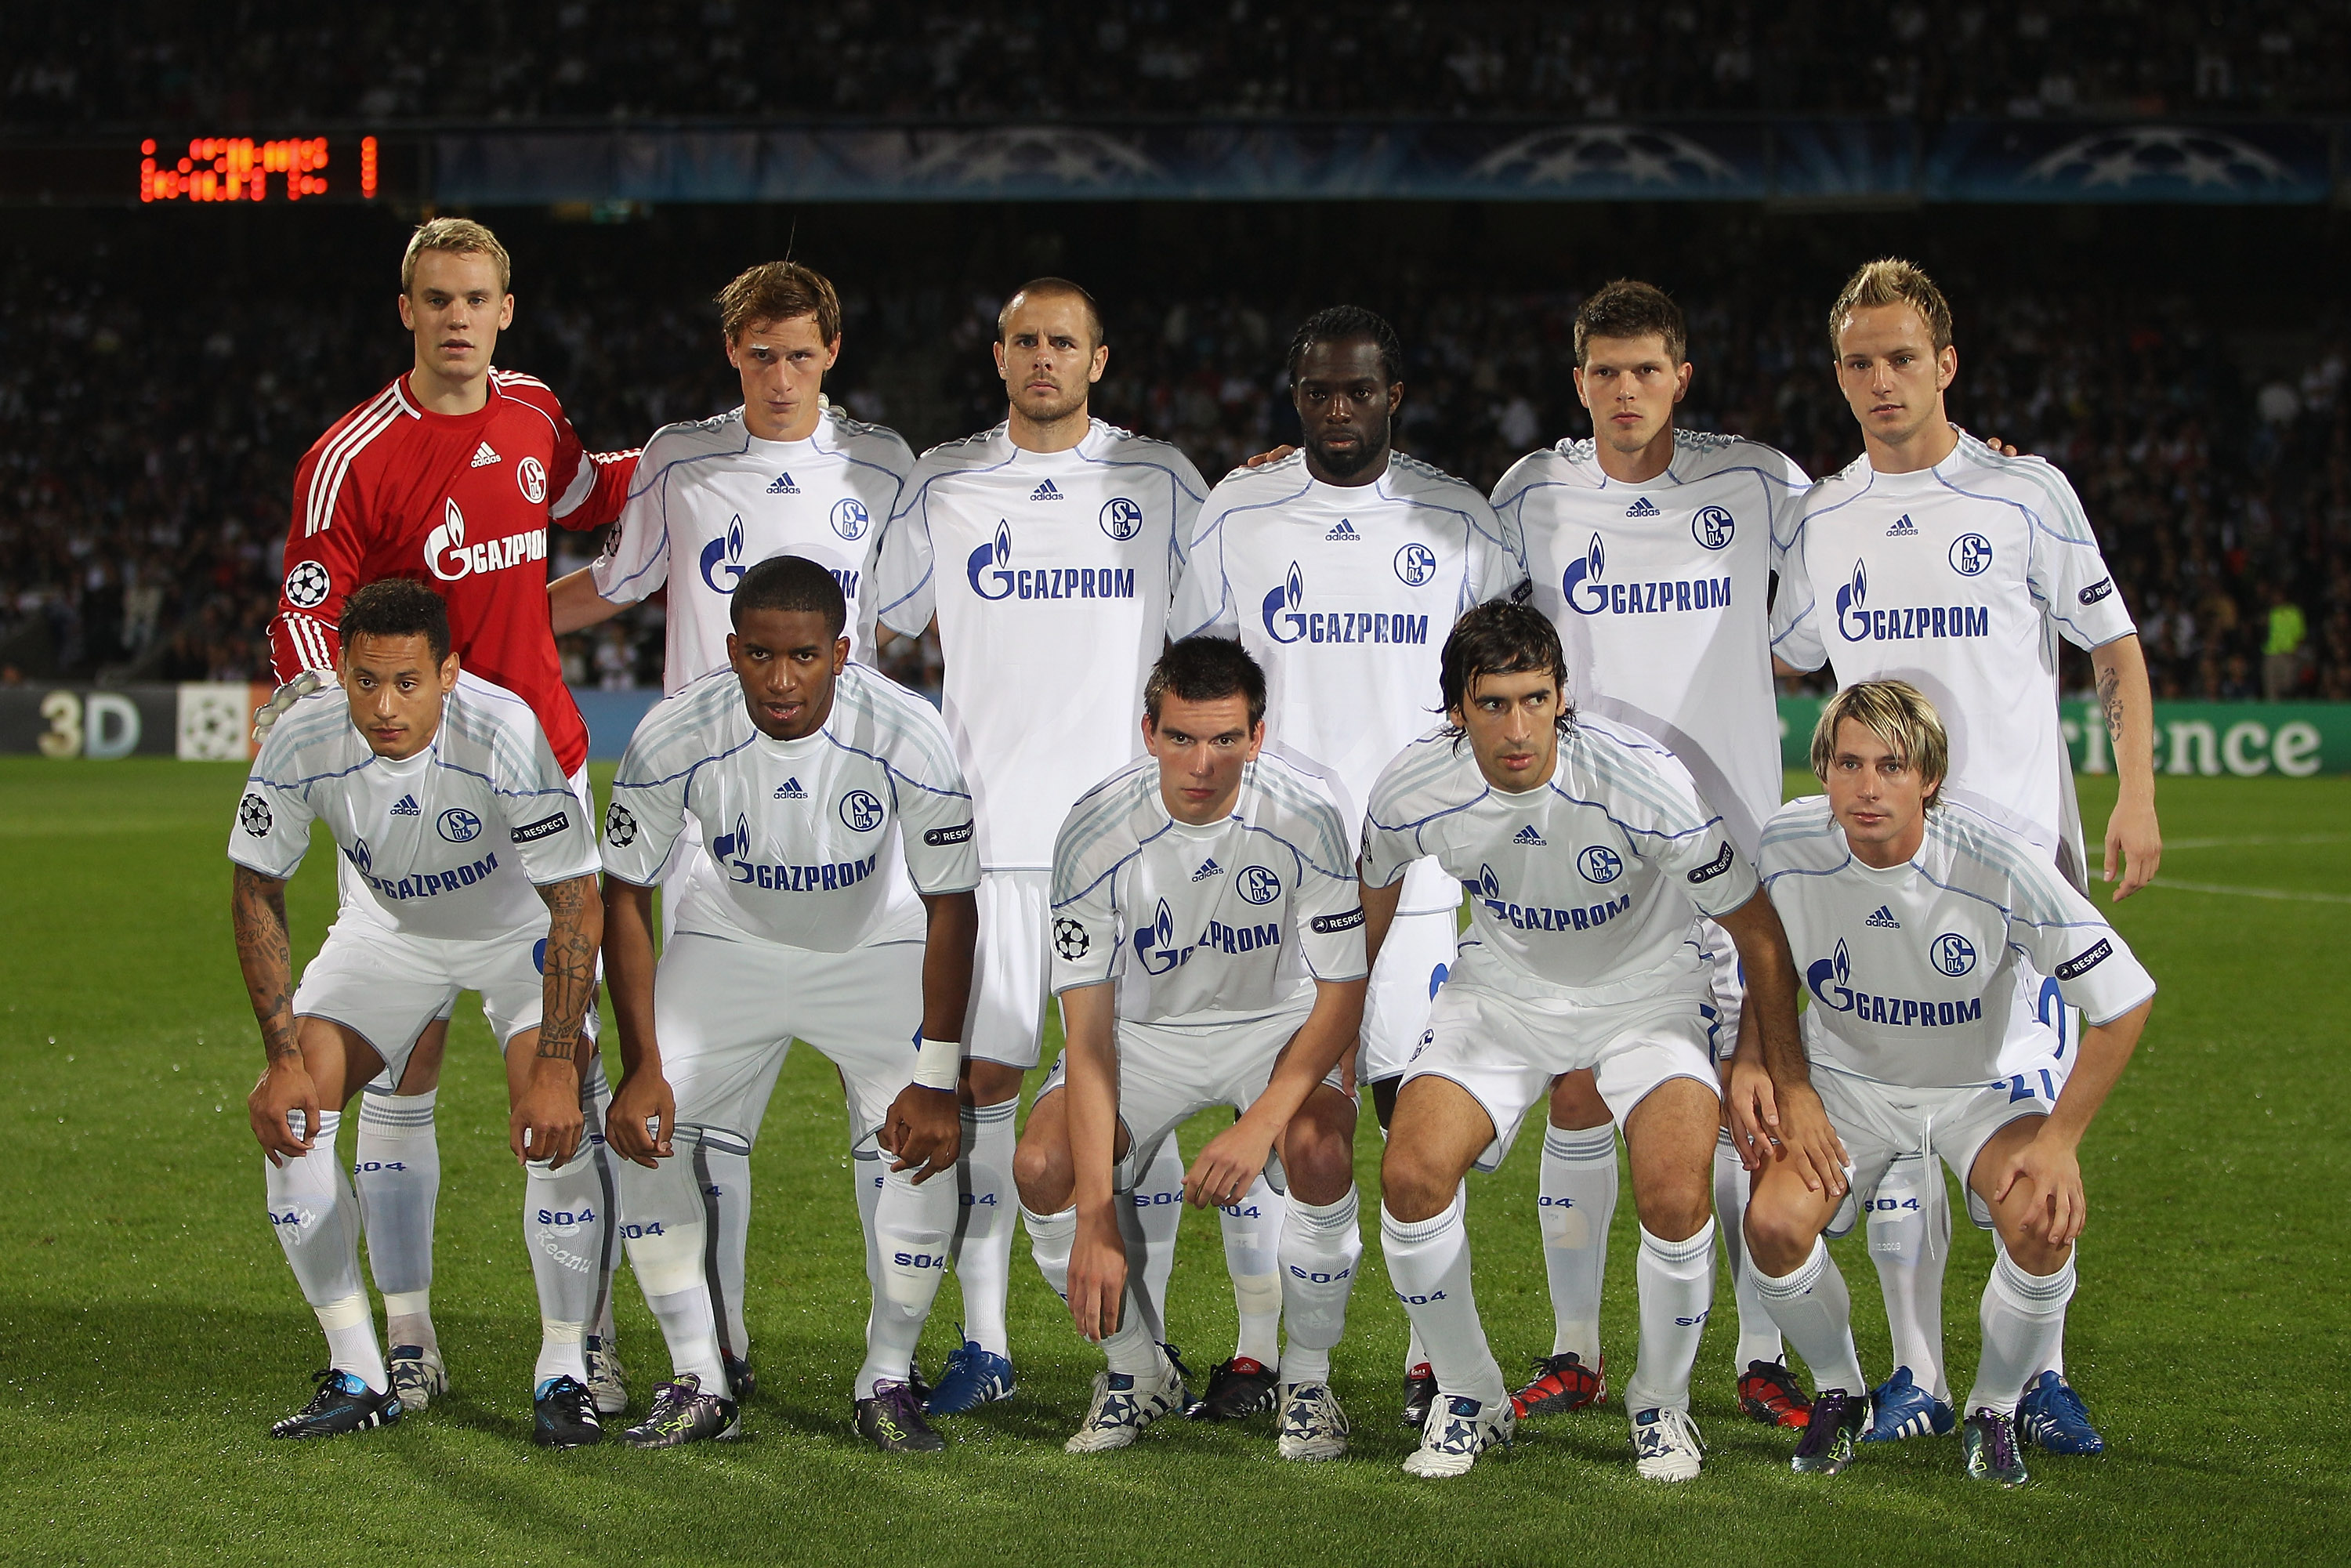 LYON, FRANCE - SEPTEMBER 14:  Schalke team group during the UEFA Champions League Group B match between Olympique Lyonnais and FC Schalke 04 at the Stade de Gerland on September 14, 2010 in Lyon, France.  (Photo by Michael Steele/Getty Images)